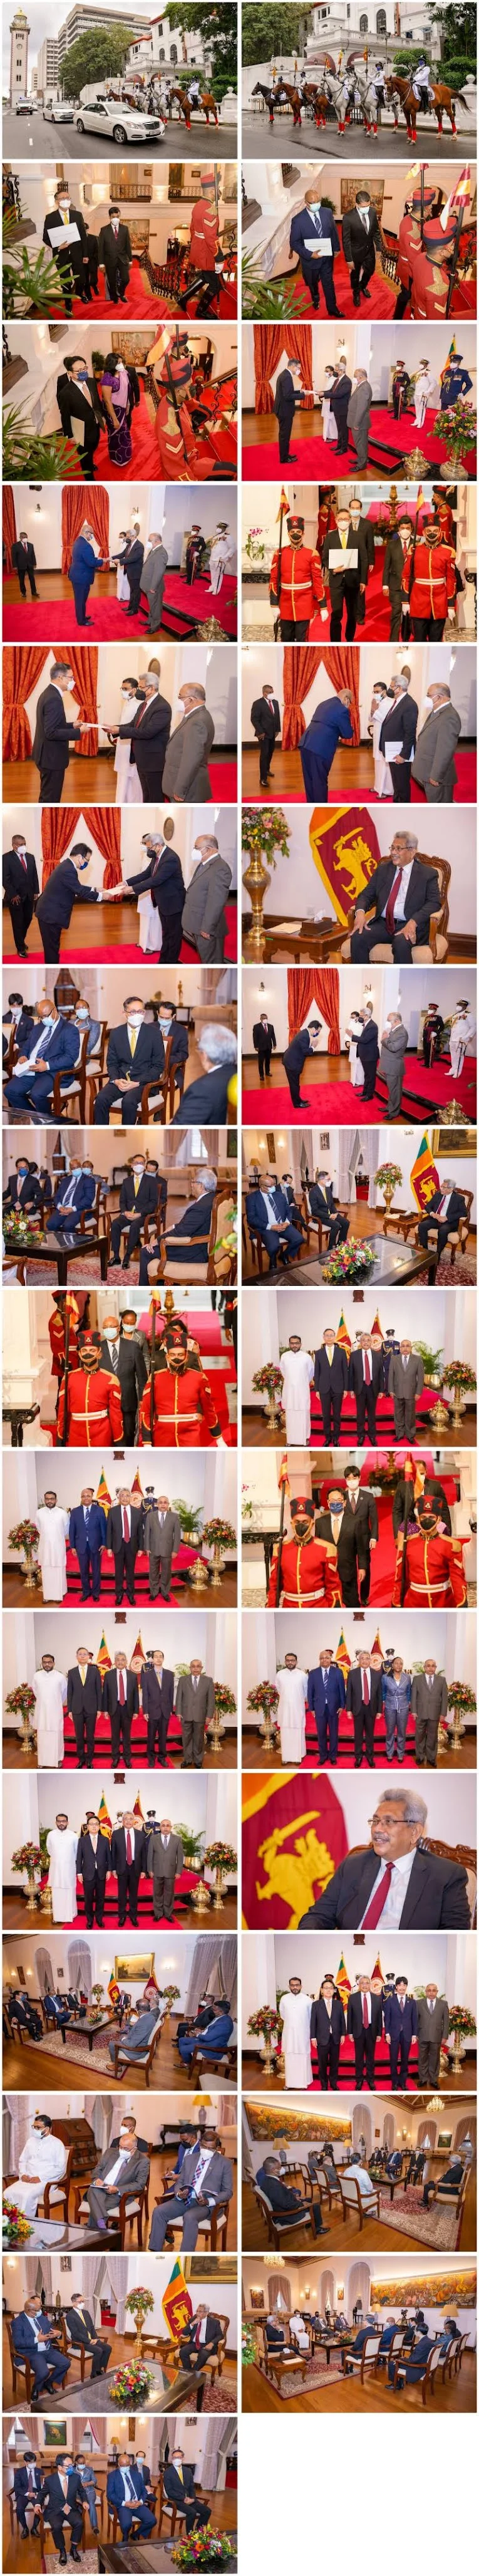 President-accepts-appointment-of-Ambassadors-to-Thailand-Japan-and-South-Africa